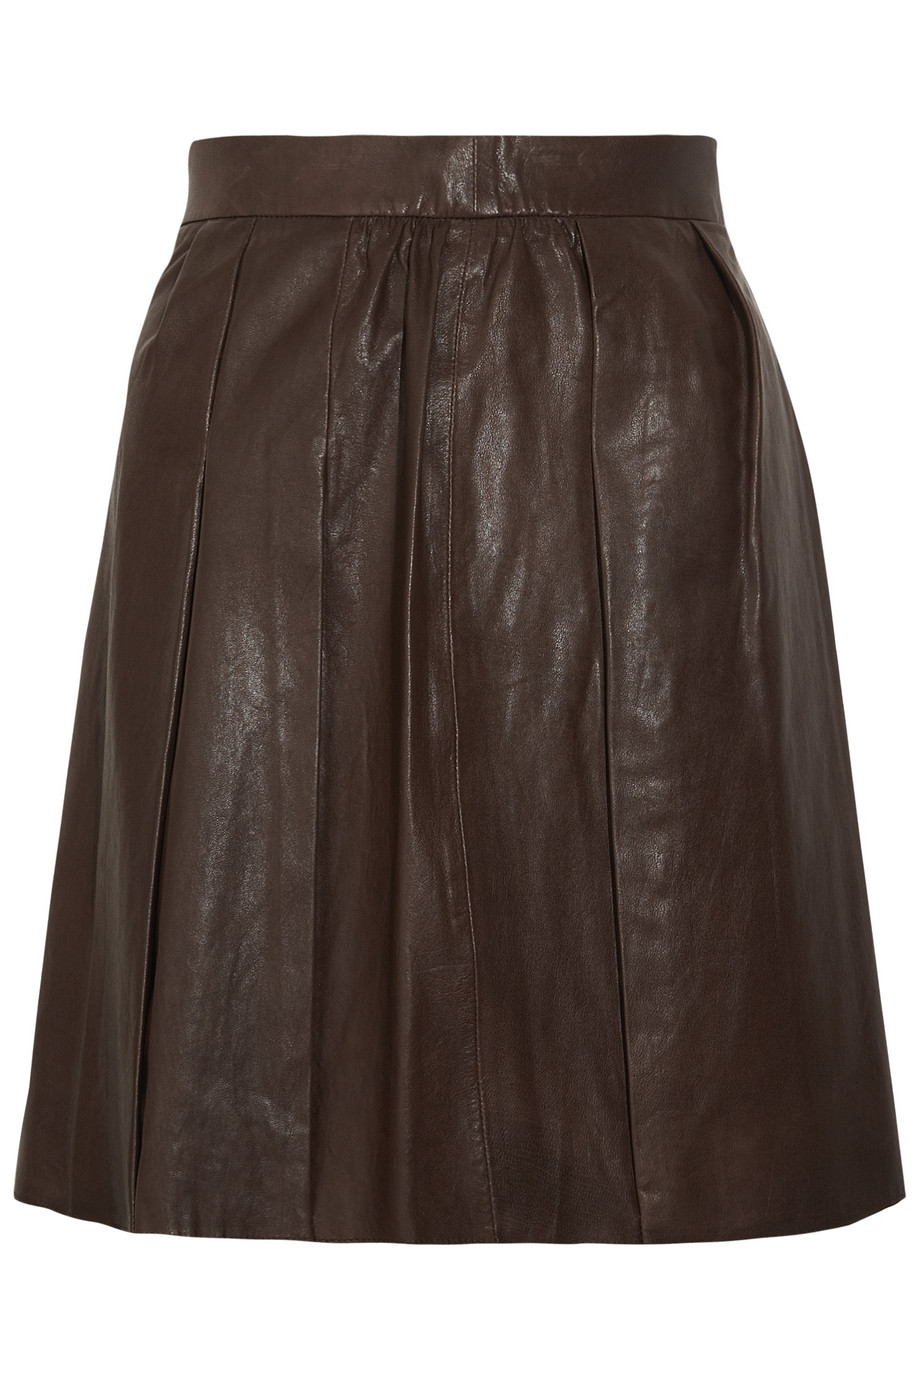 Vince Leather Mini Skirt in Brown | Lyst